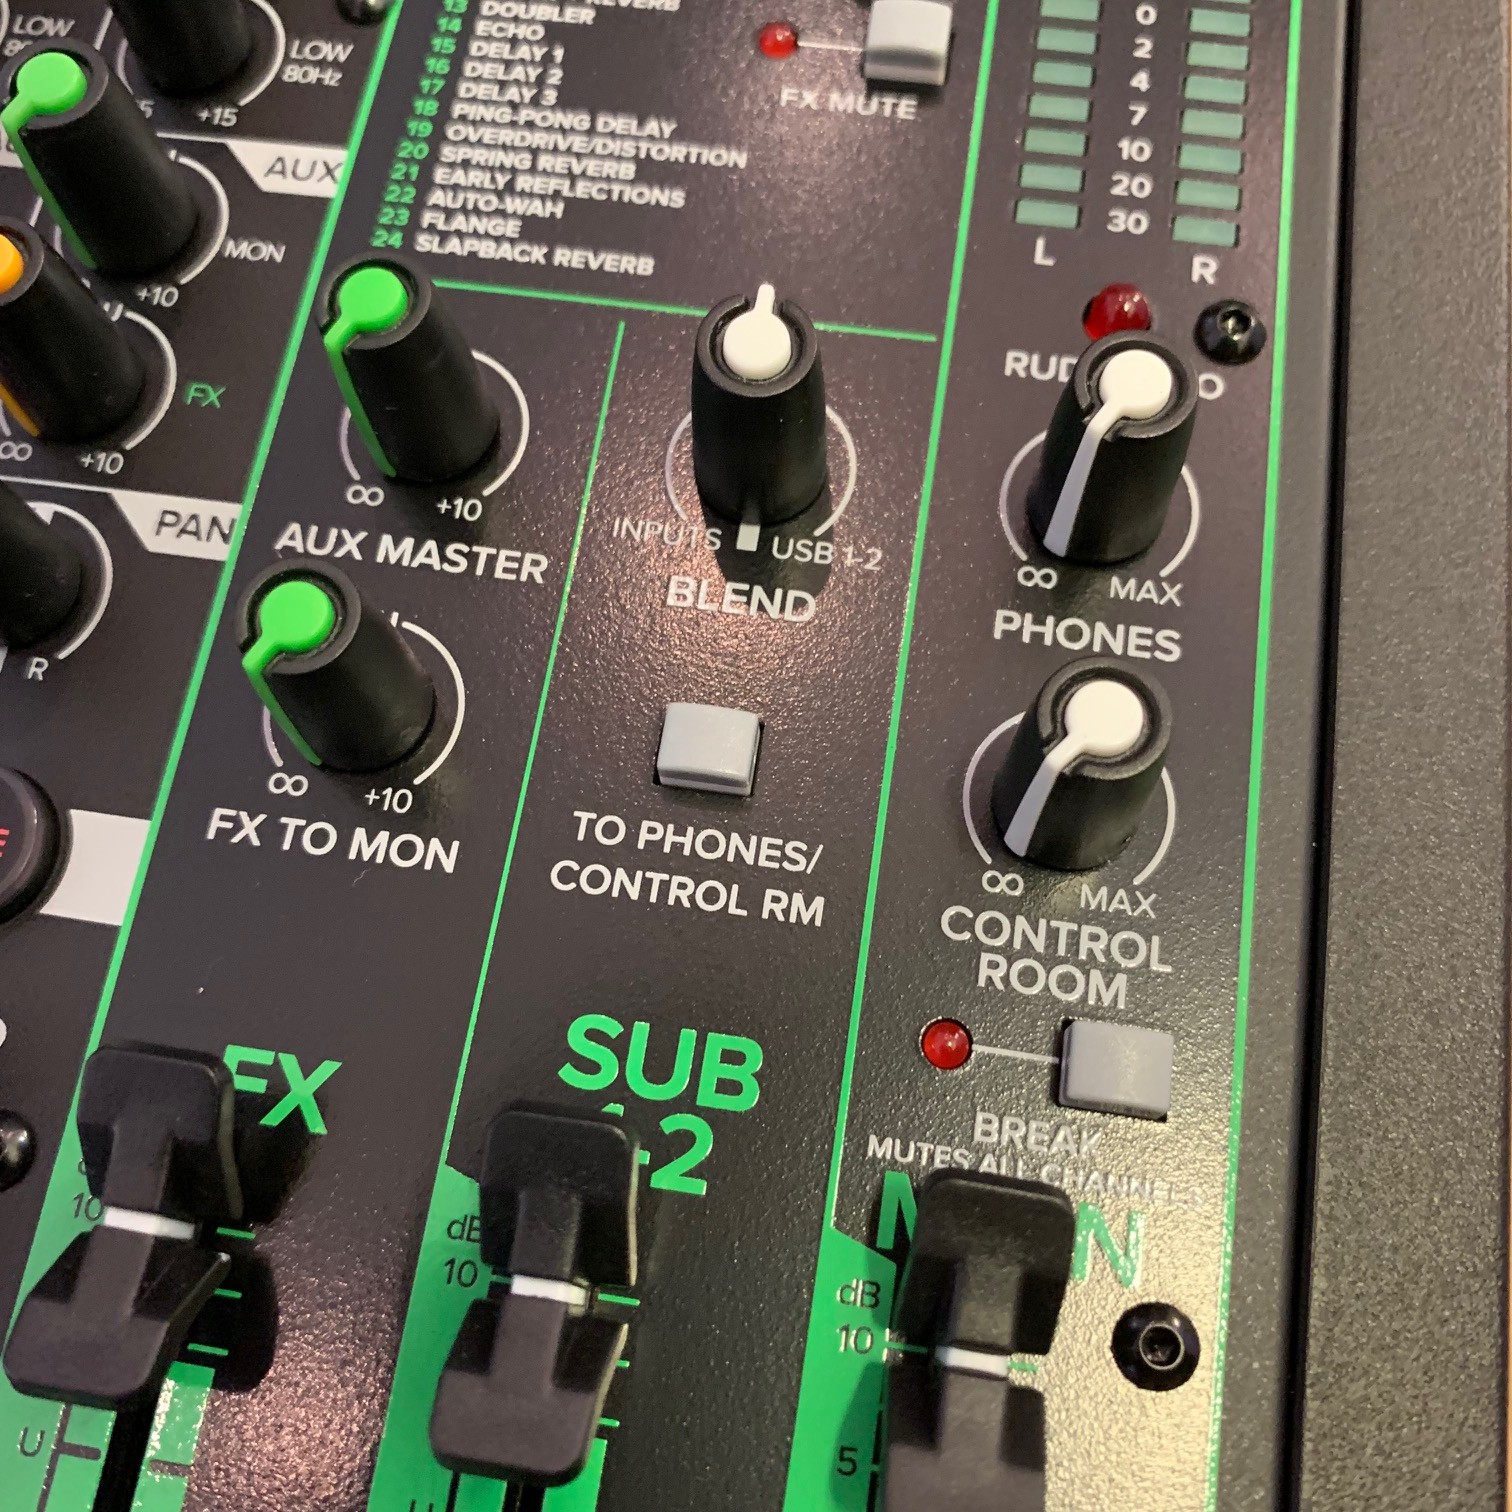 Onyx Mic Preamps with Built-In FX Featuring Pro Tools First DAW Music Editing Software with Kit Mackie ProFX12v3 12-Channel Sound Reinforcement Professional Effects Mixer 2x4 USB Audio Interface 